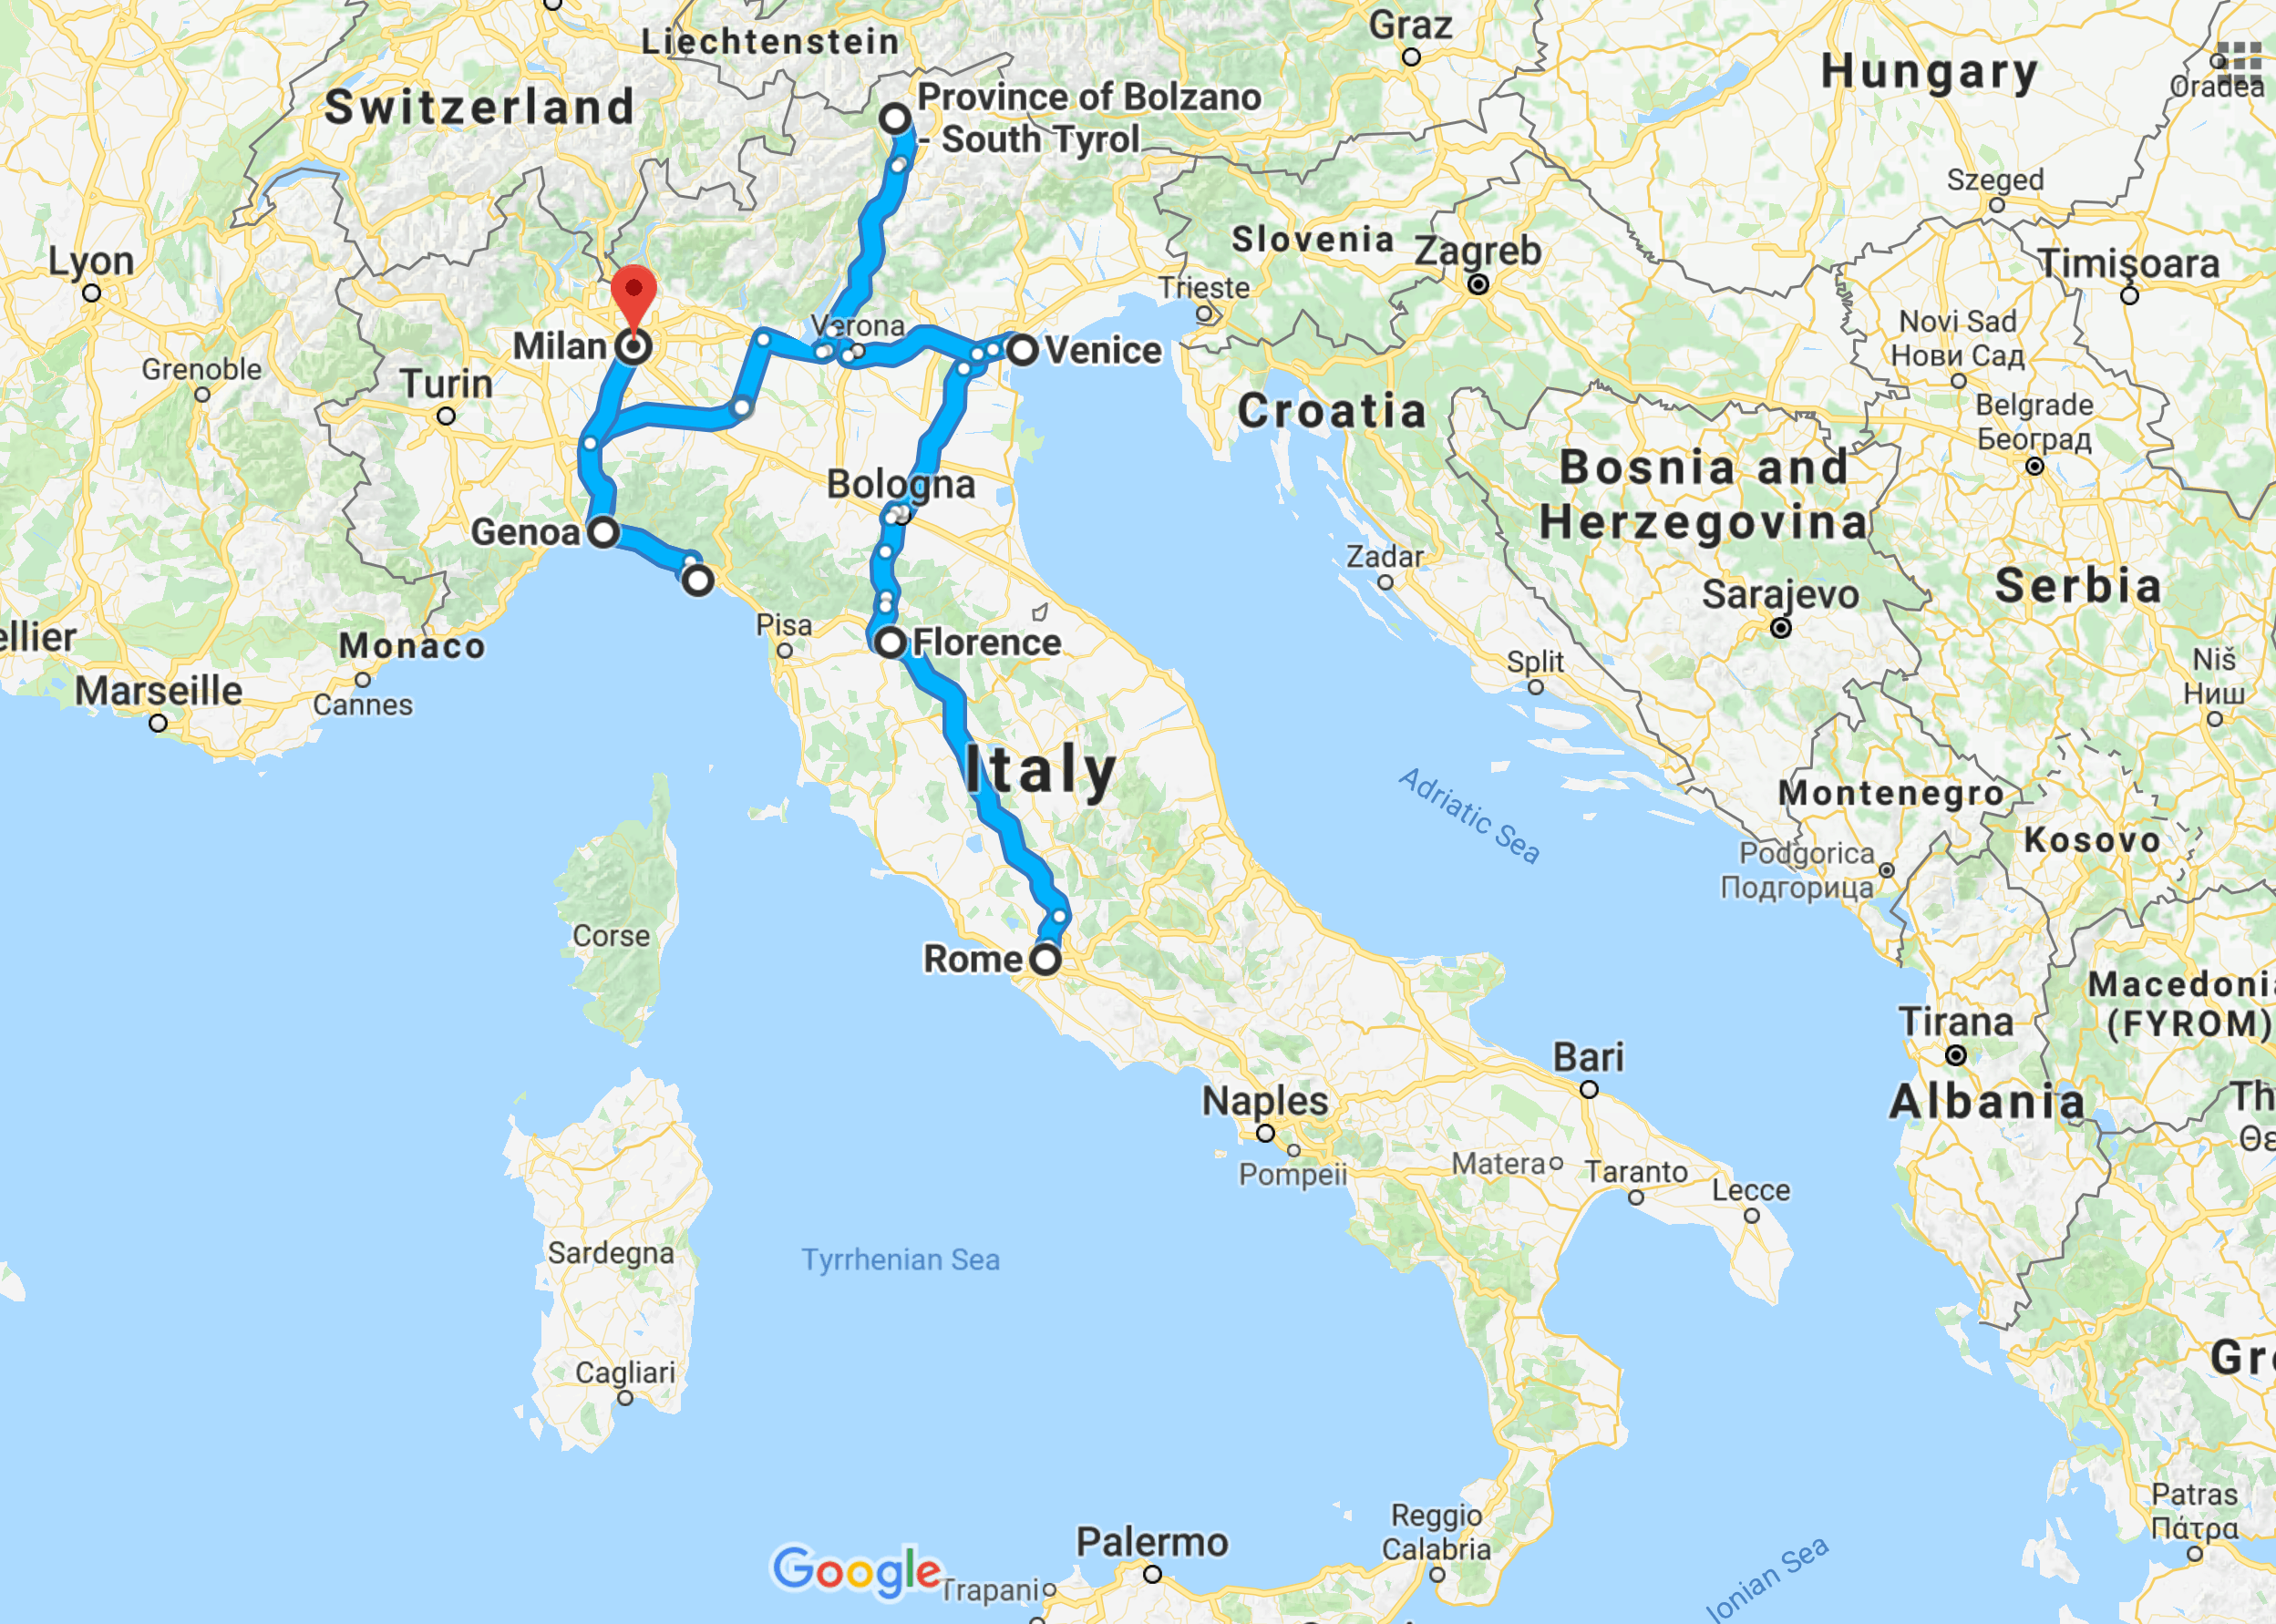 planning your own trip to italy